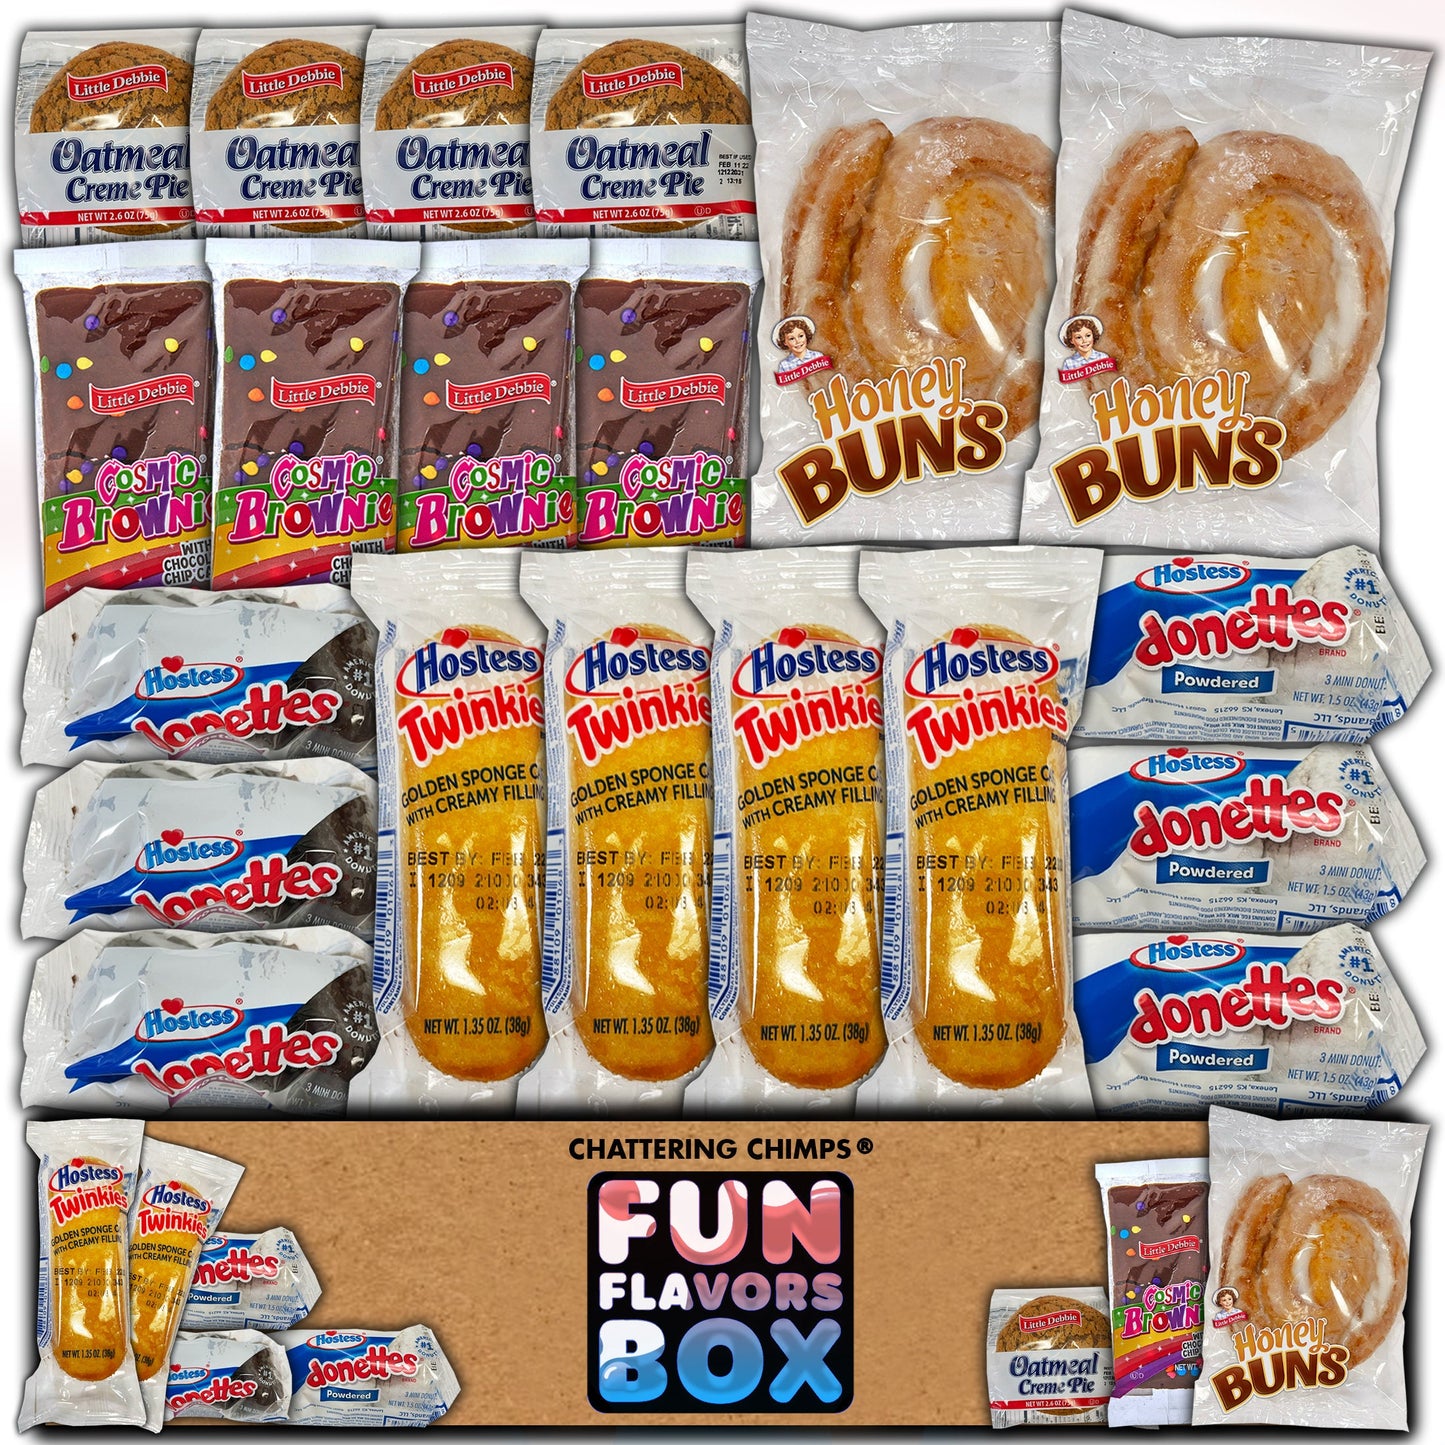 Fun Flavors Box Pastry snack box variety gift, Little Debbie and Hostess Cakes